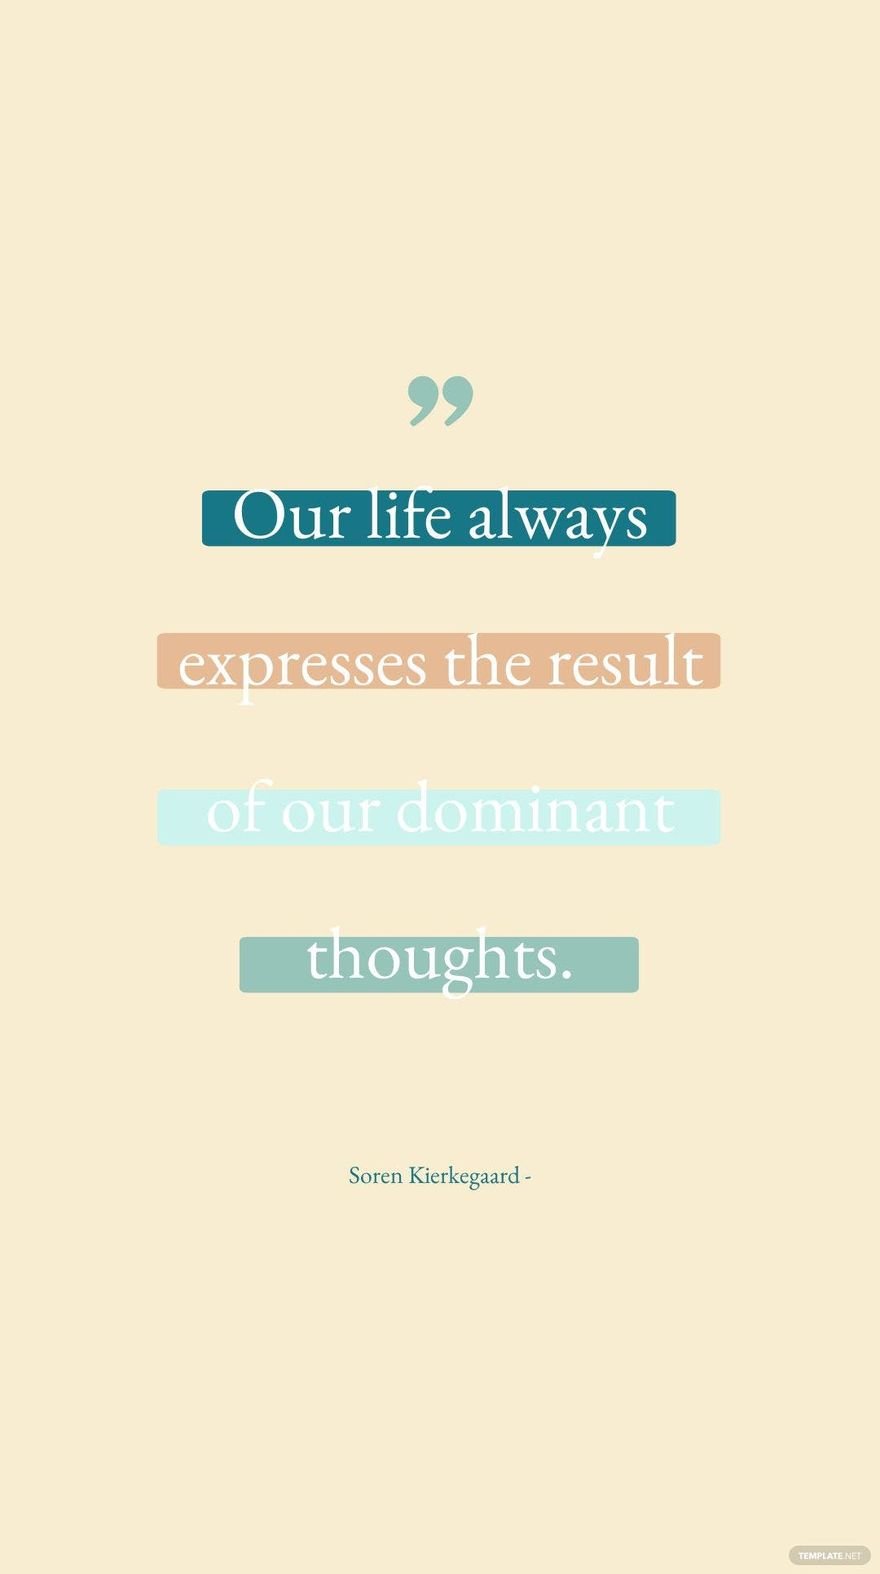 Soren Kierkegaard - Our life always expresses the result of our dominant thoughts.